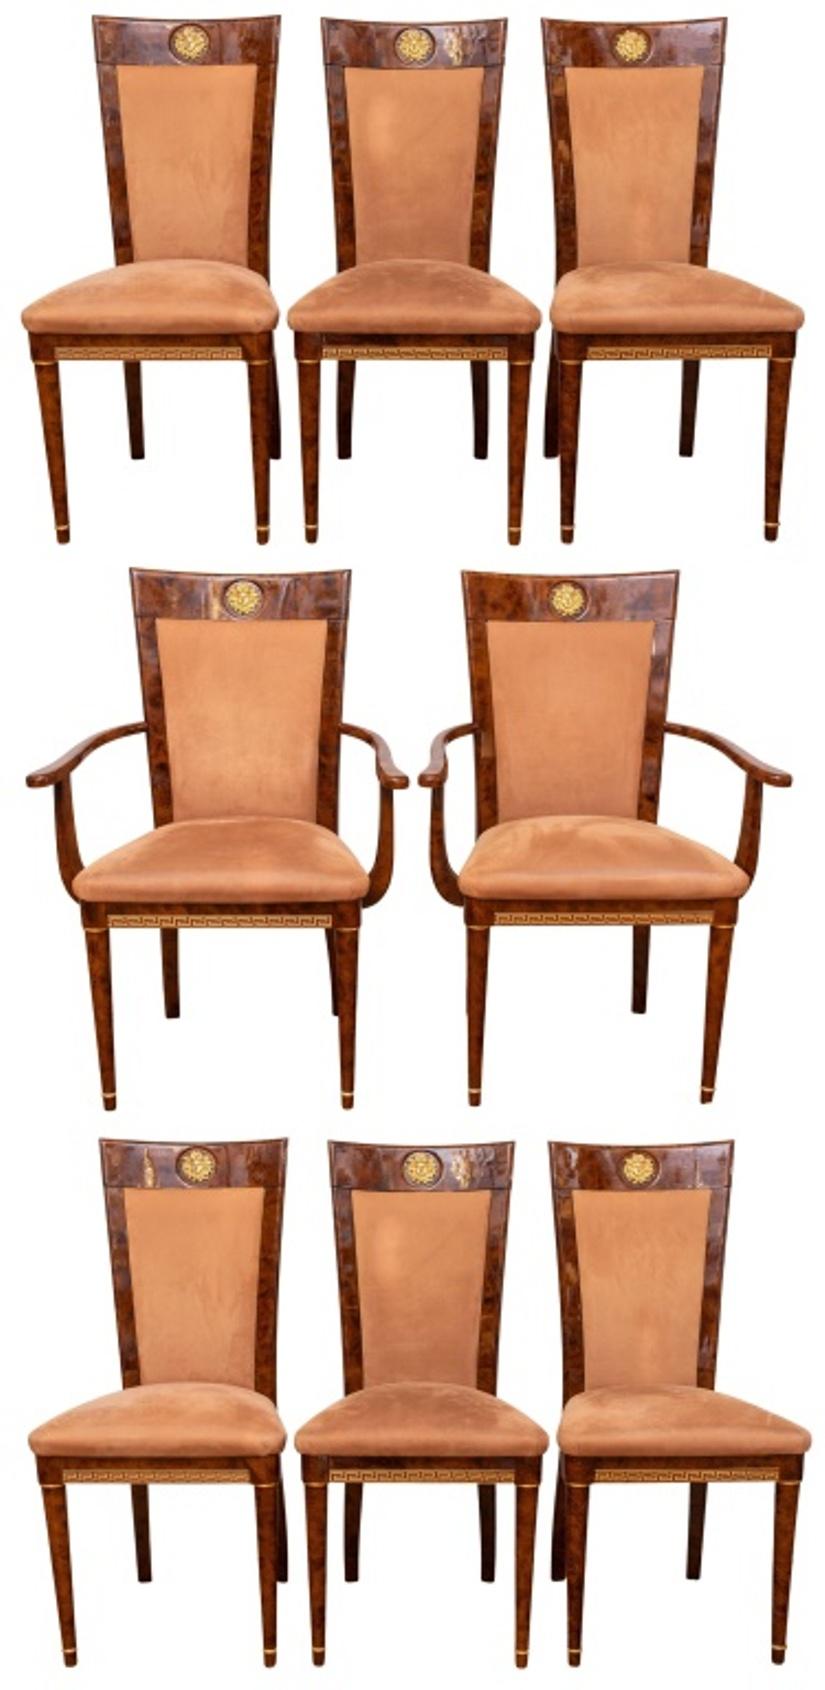 Versace home dining chairs in the neoclassical taste, 8, comprising two (2) arm chairs and six (6) side chairs in a fantasy burlwood lacquer finish, each with curved crest rail centering a gilded bronze Versace Medusa head above tapering rectangular